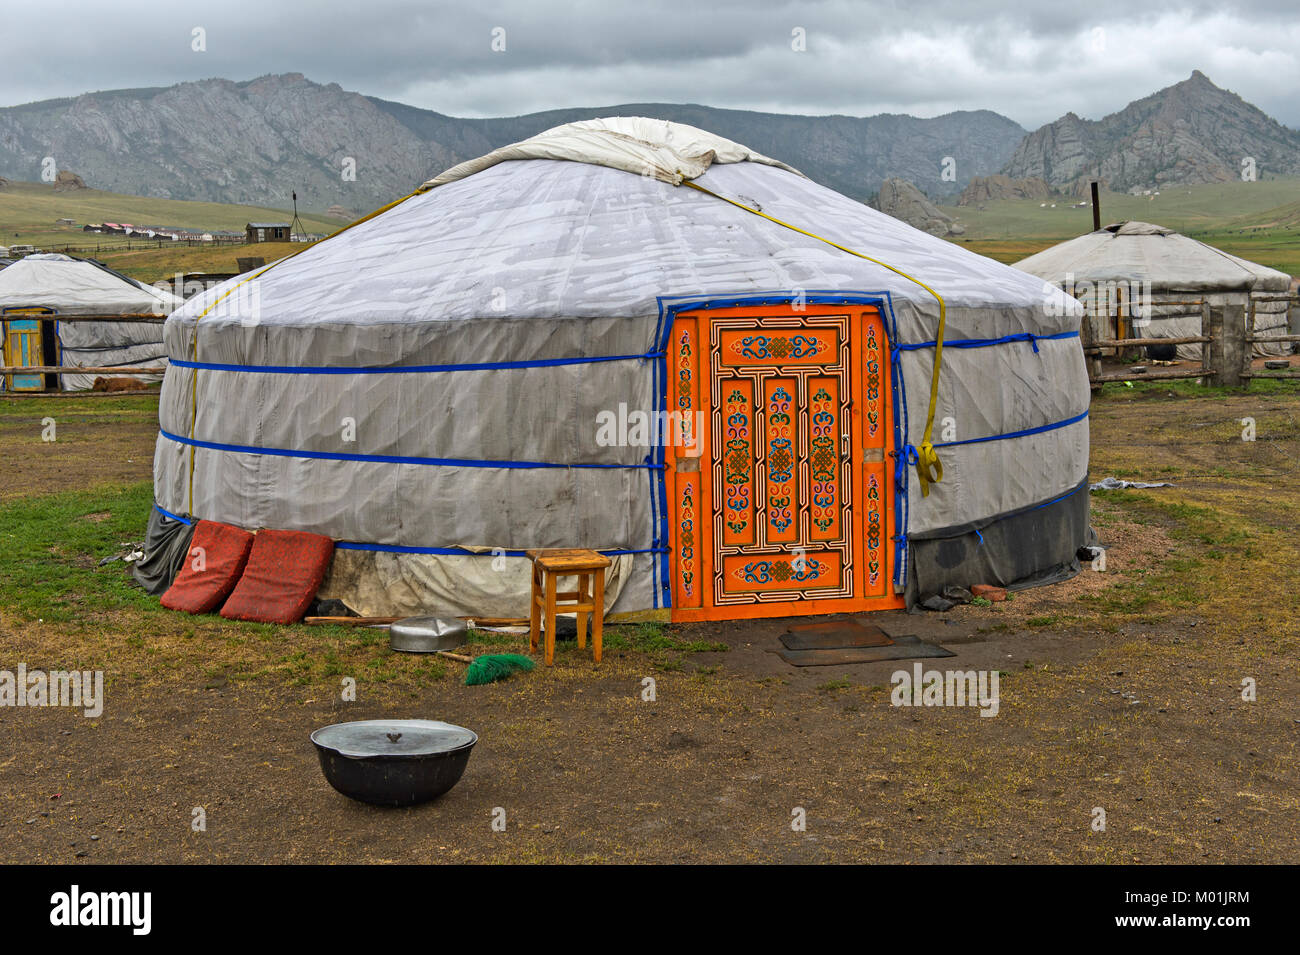 Yurt with colorful door in a camp of Mongolian nomads, Gorkhi-Terelj National Park, Mongolia Stock Photo